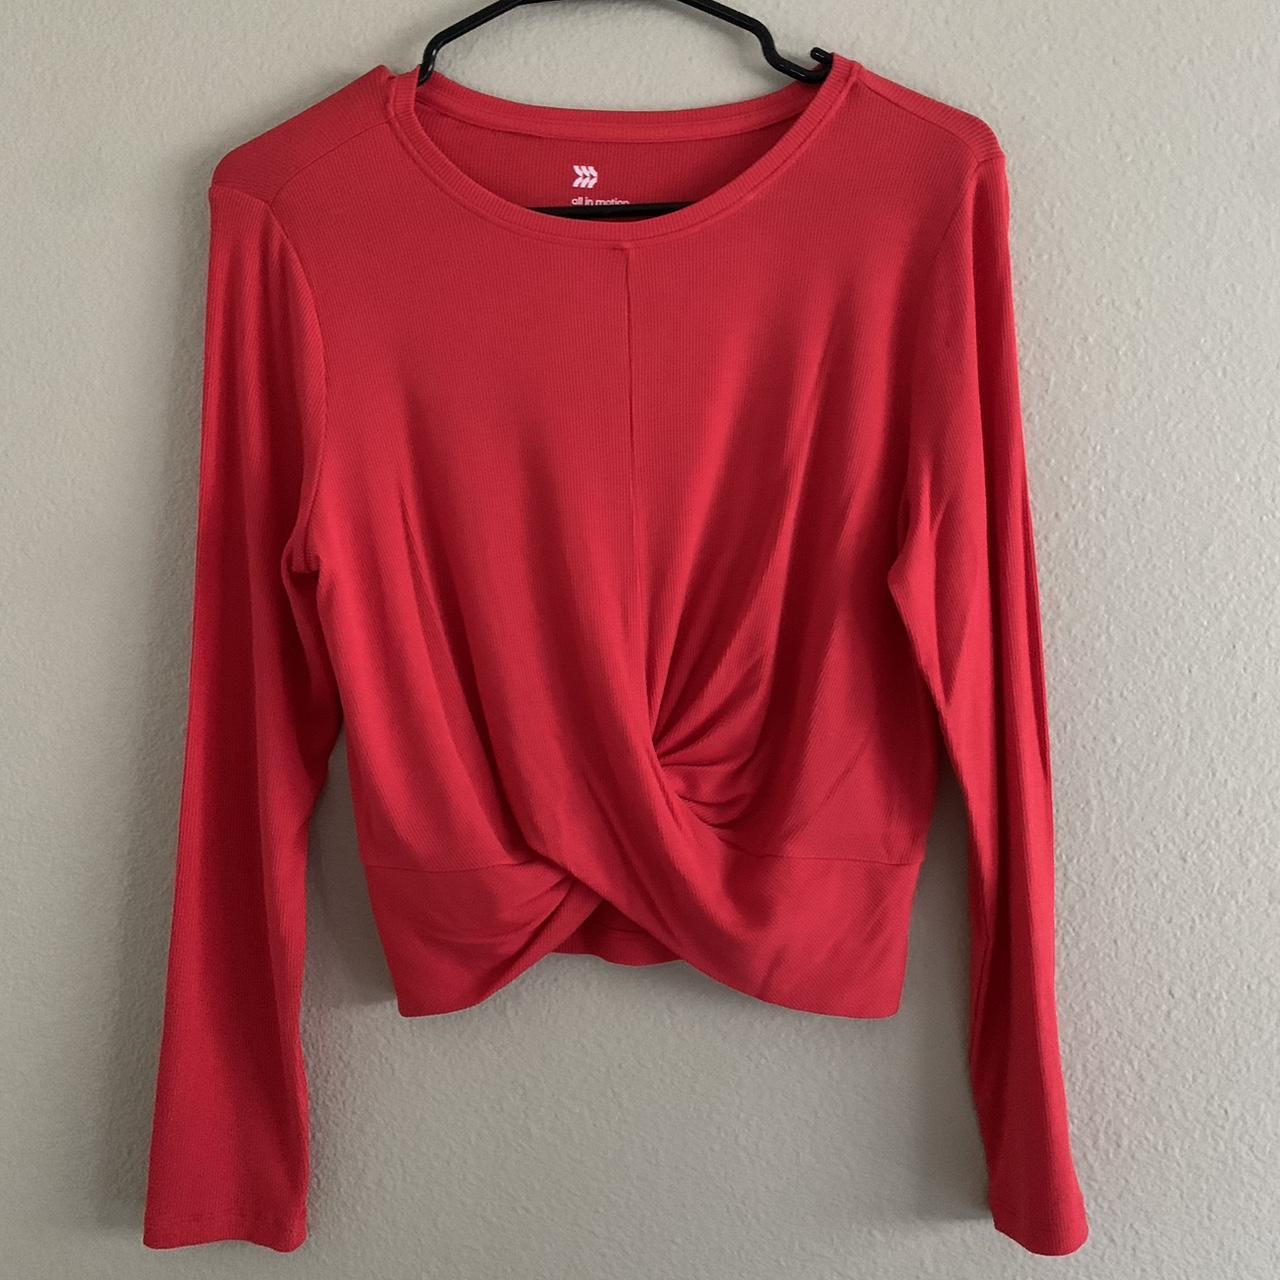 Target brand all in motion red workout top. Twist - Depop